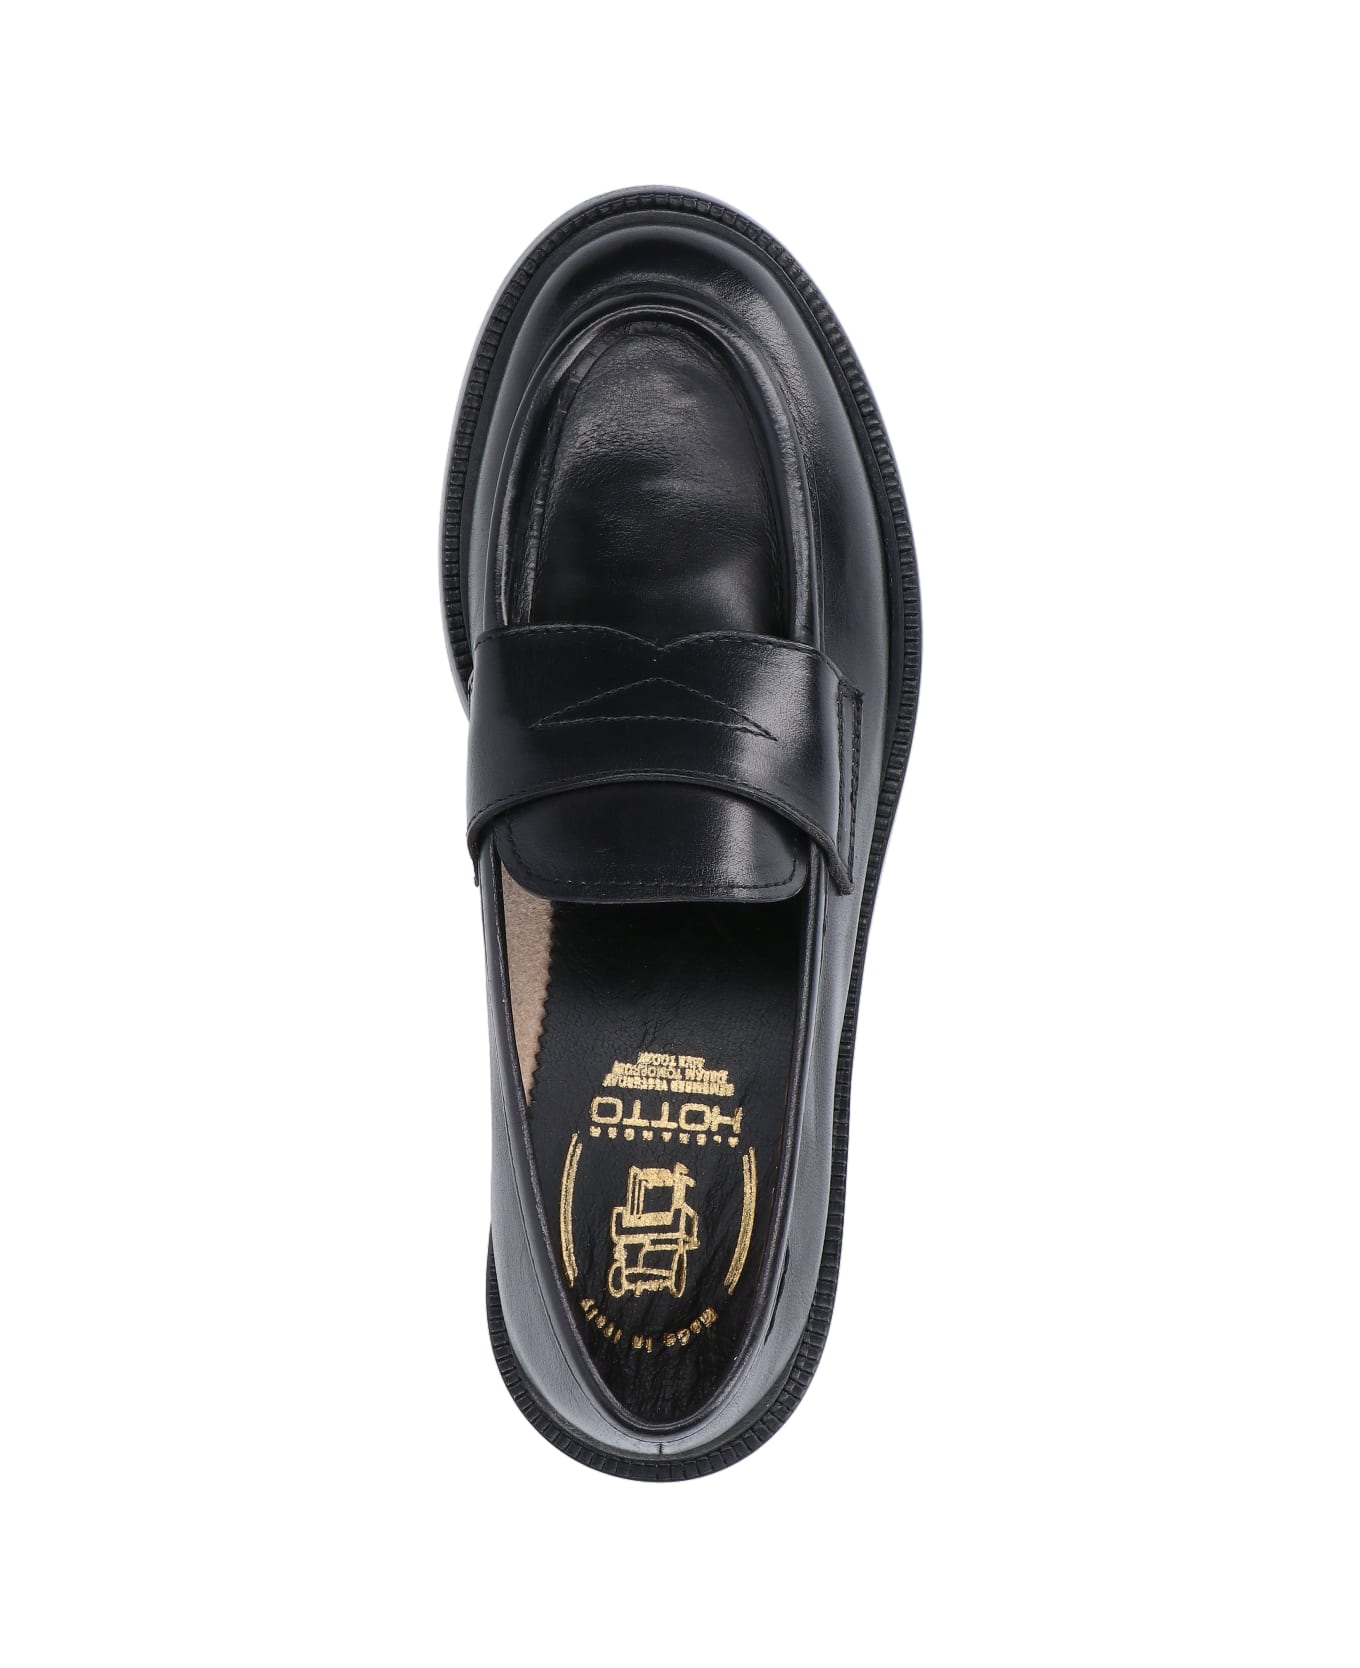 Alexander Hotto Classic Loafers - Black  